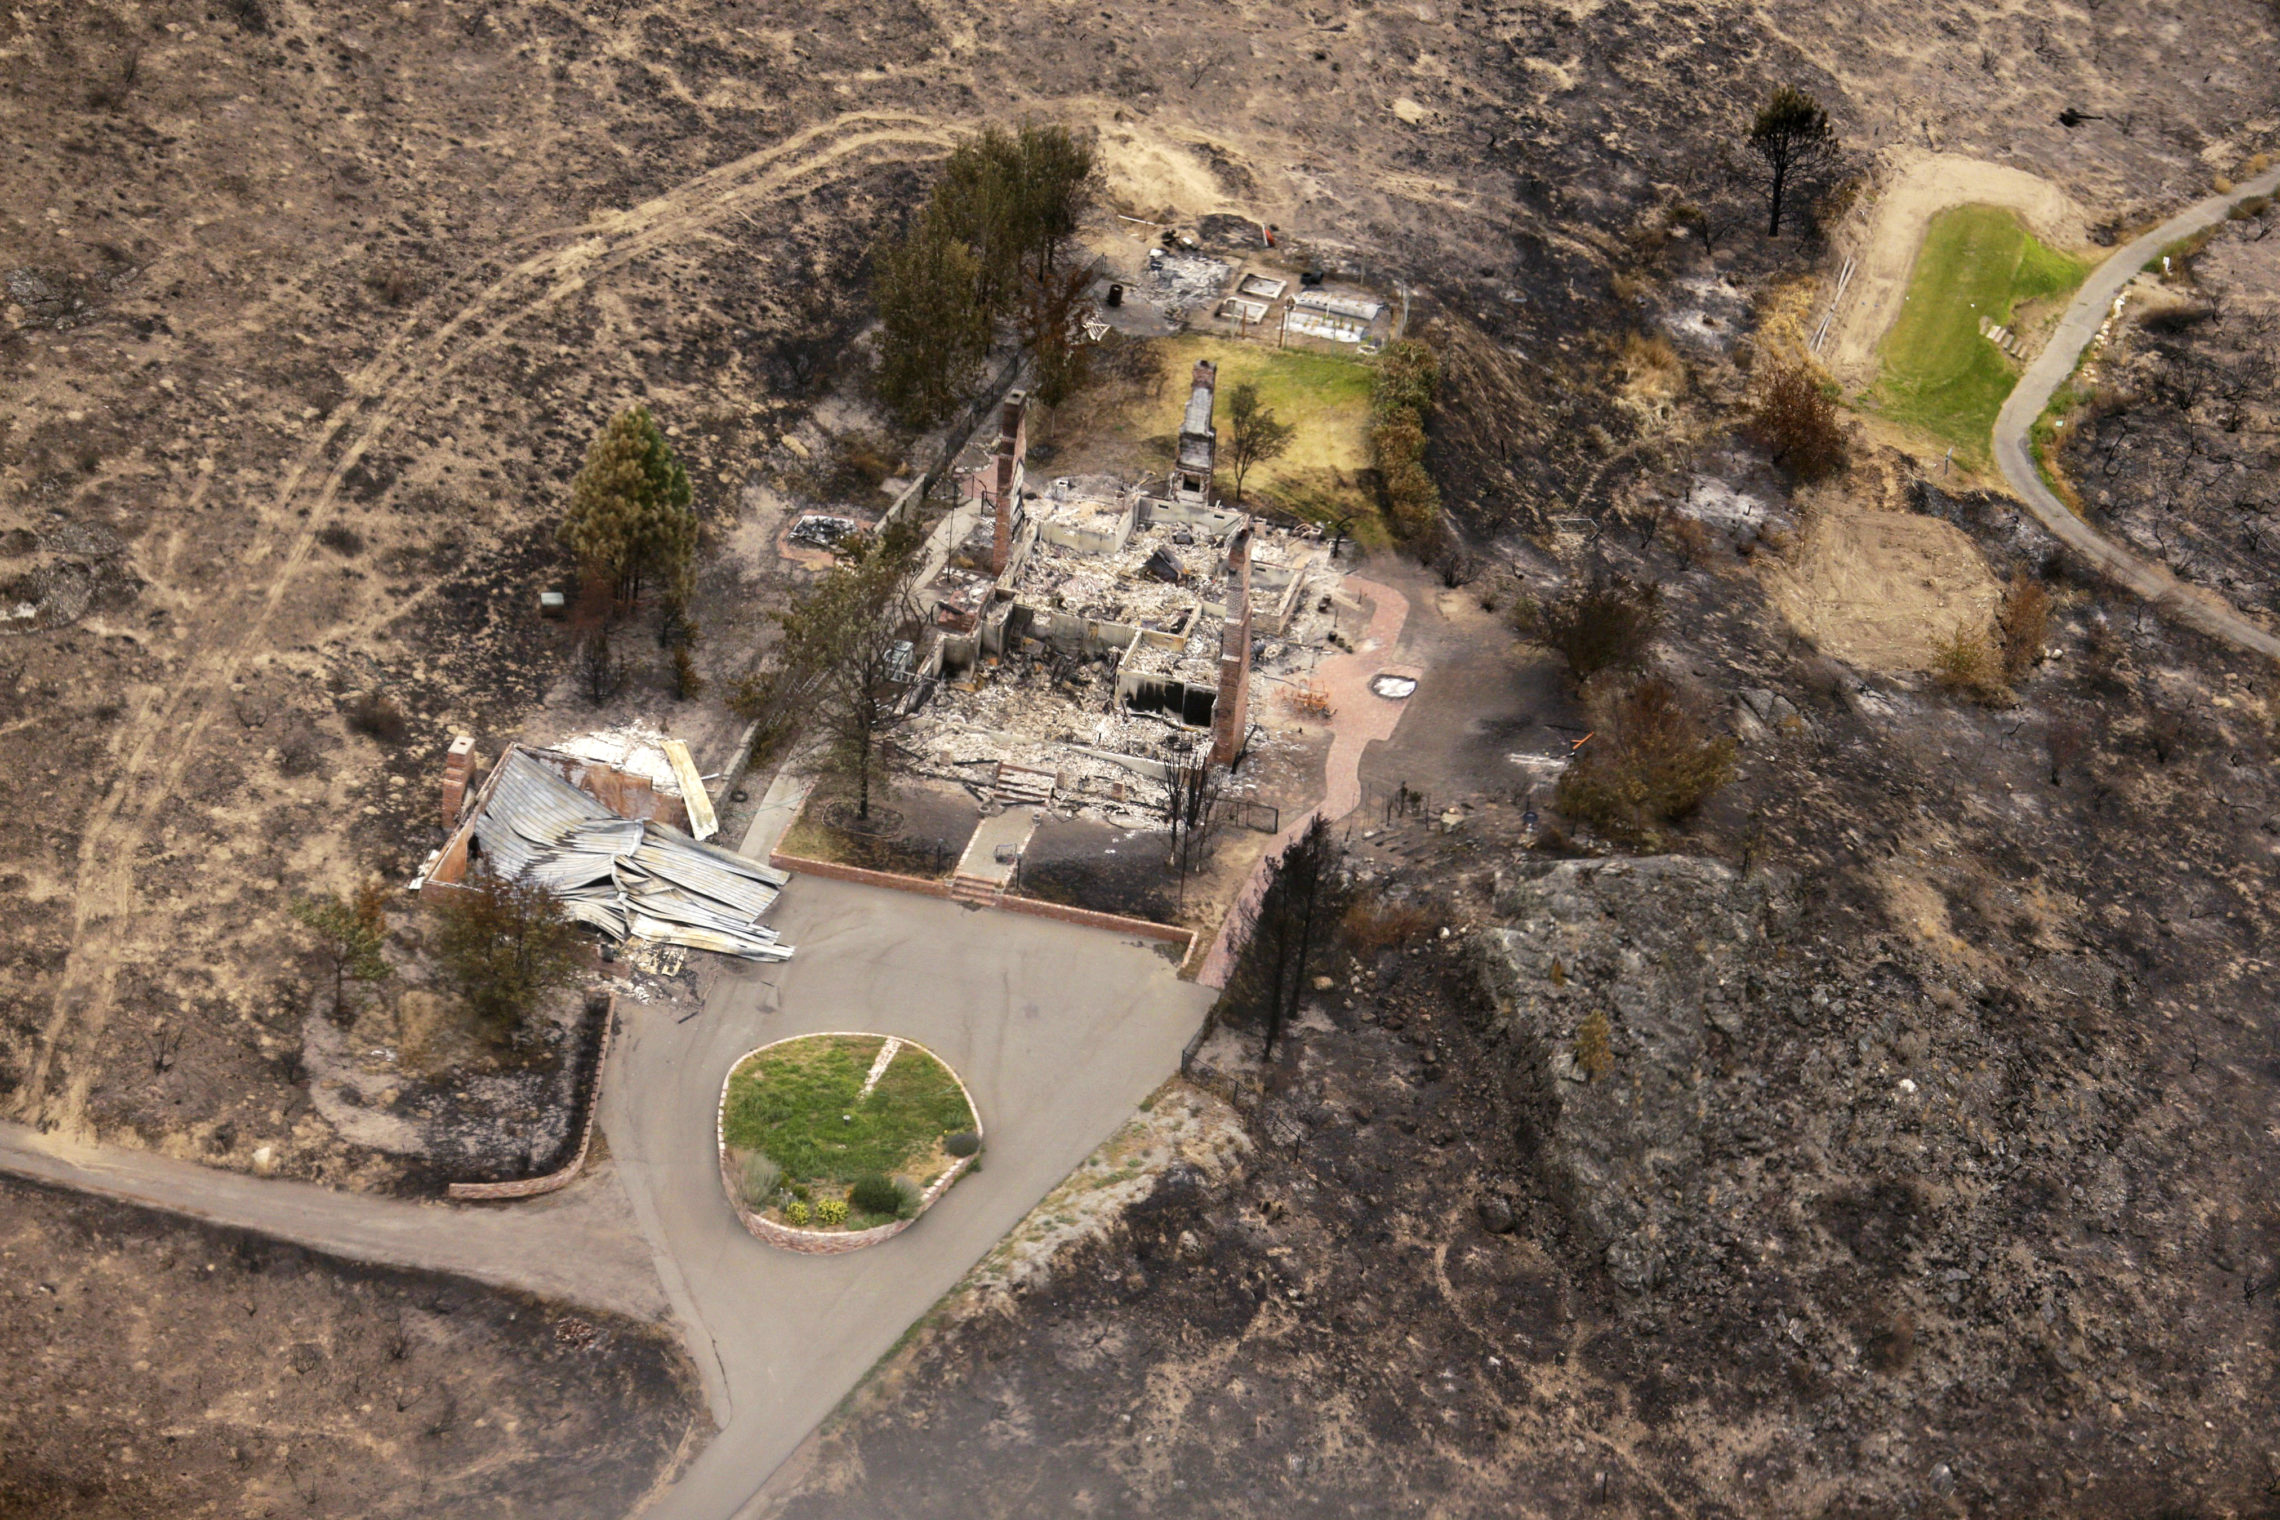 In this July 24, 2014, the remains of structures that were destroyed by wildfires near Pateros, Wash. The Carlton Complex fire was the largest in Washington State history. CREDIT: AP IMAGES/TED S. WARREN